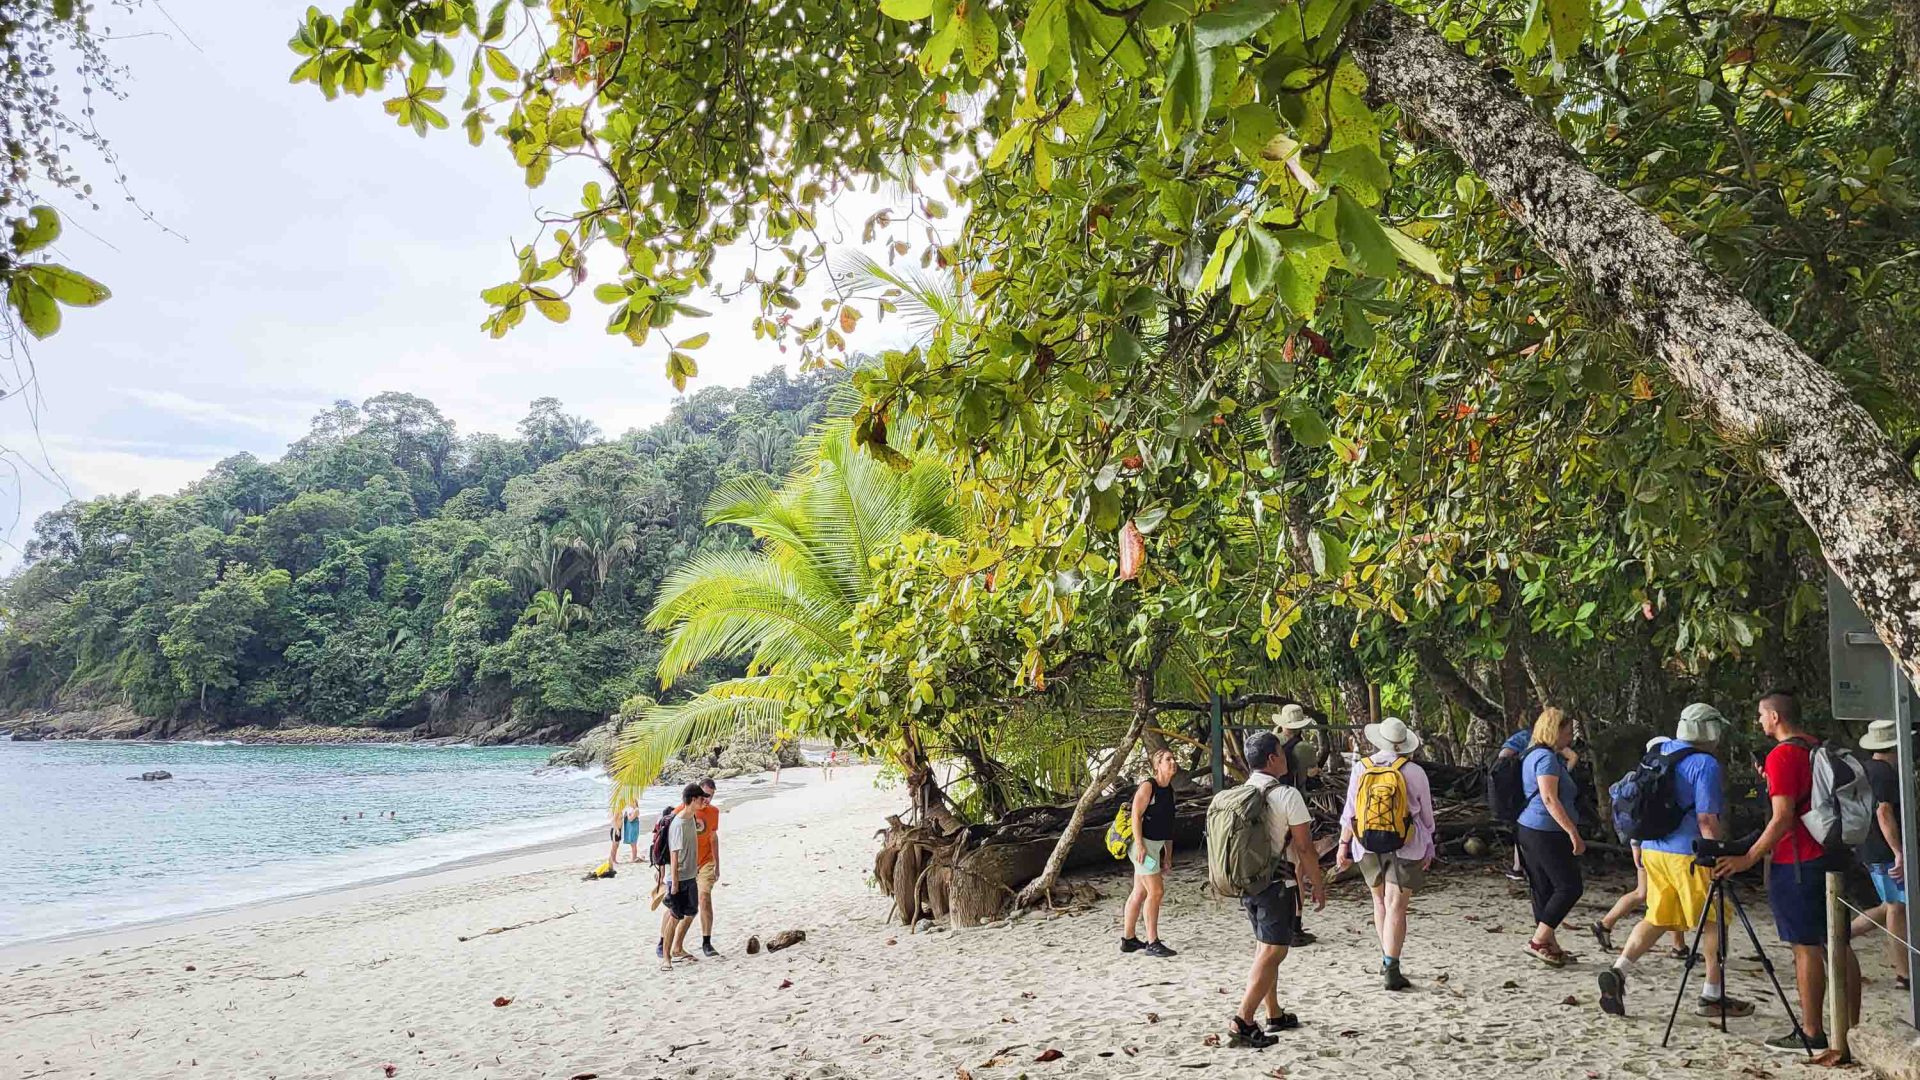 Tourists walk across the white sand of a beach with calm blue water, fringed by trees.